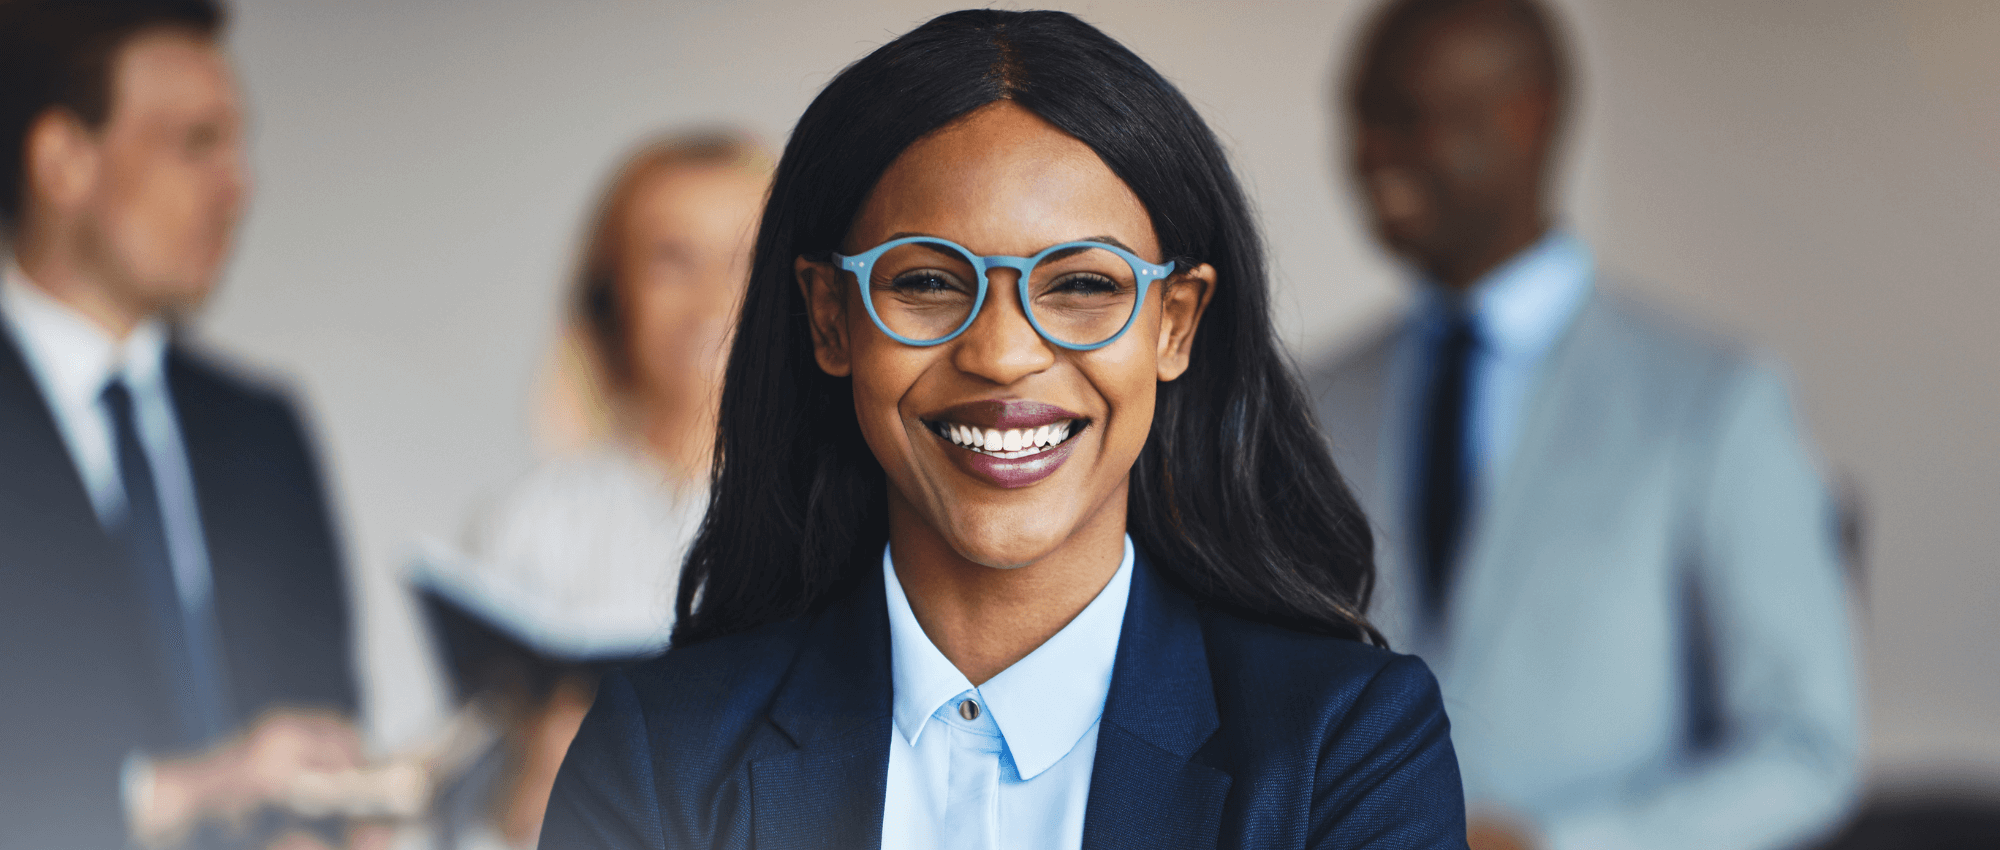 A business woman who is wearing glasses smiling